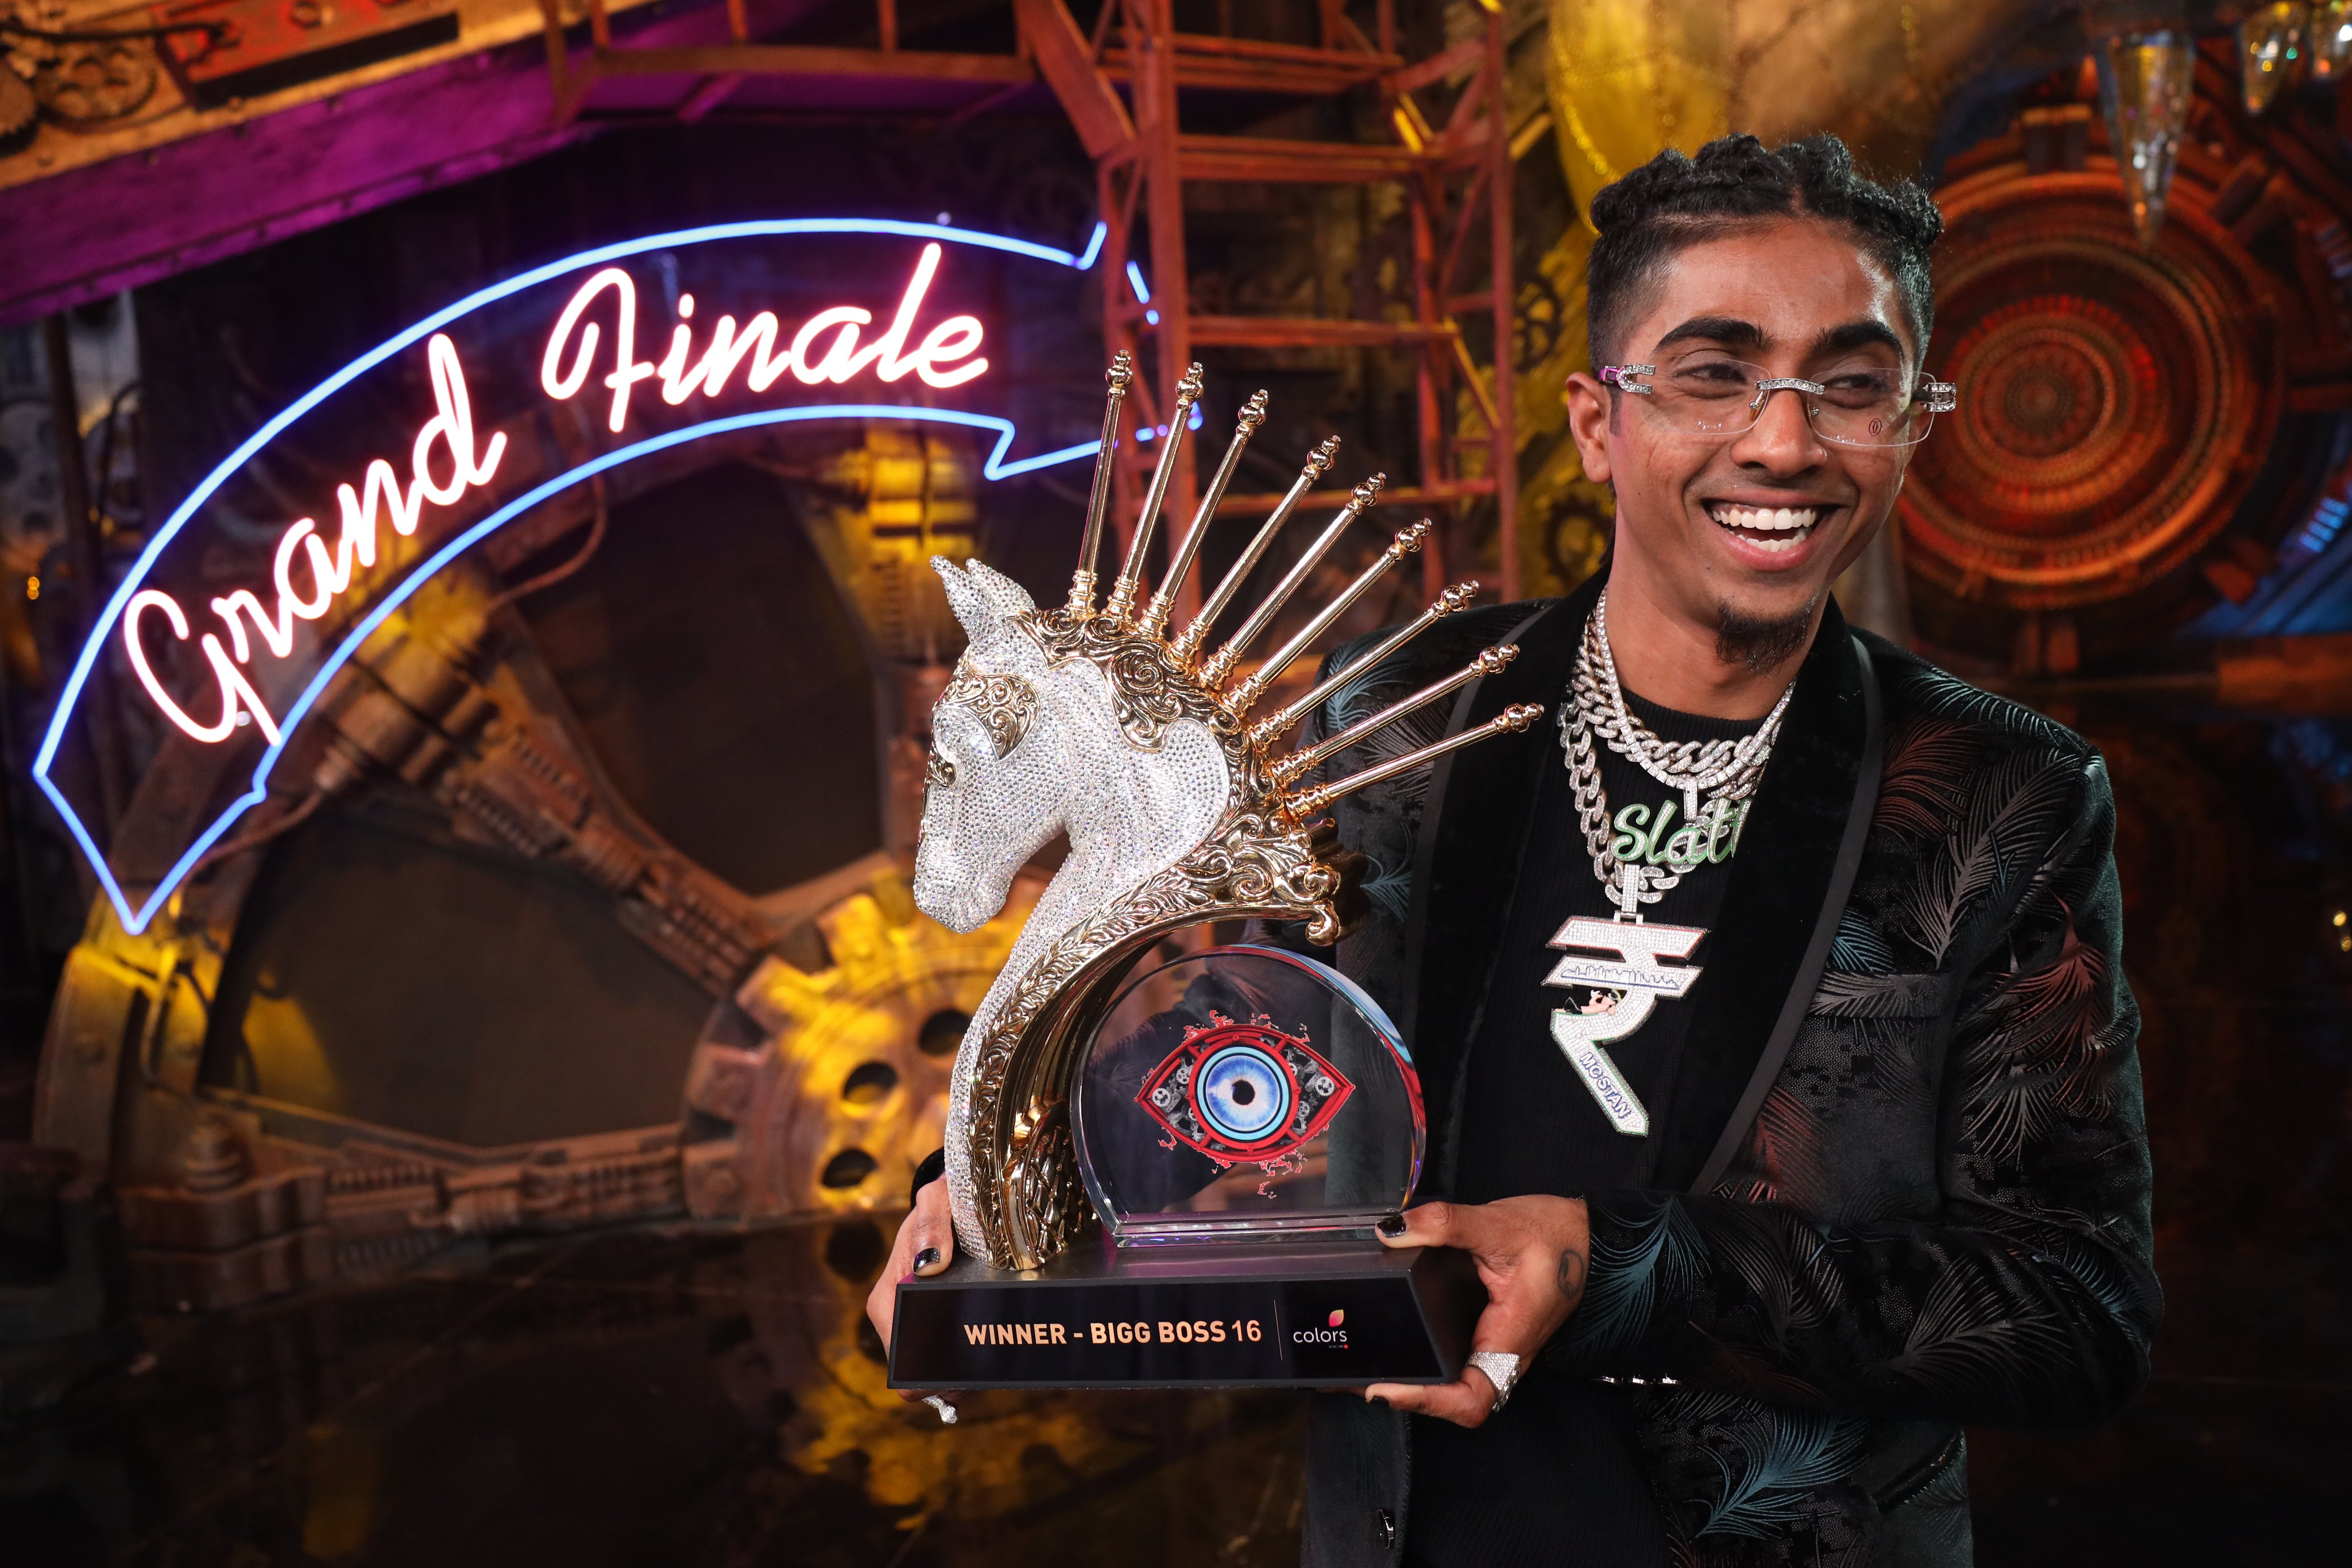 MC Stan wins Bigg Boss: Indian rap royalty finds new home on